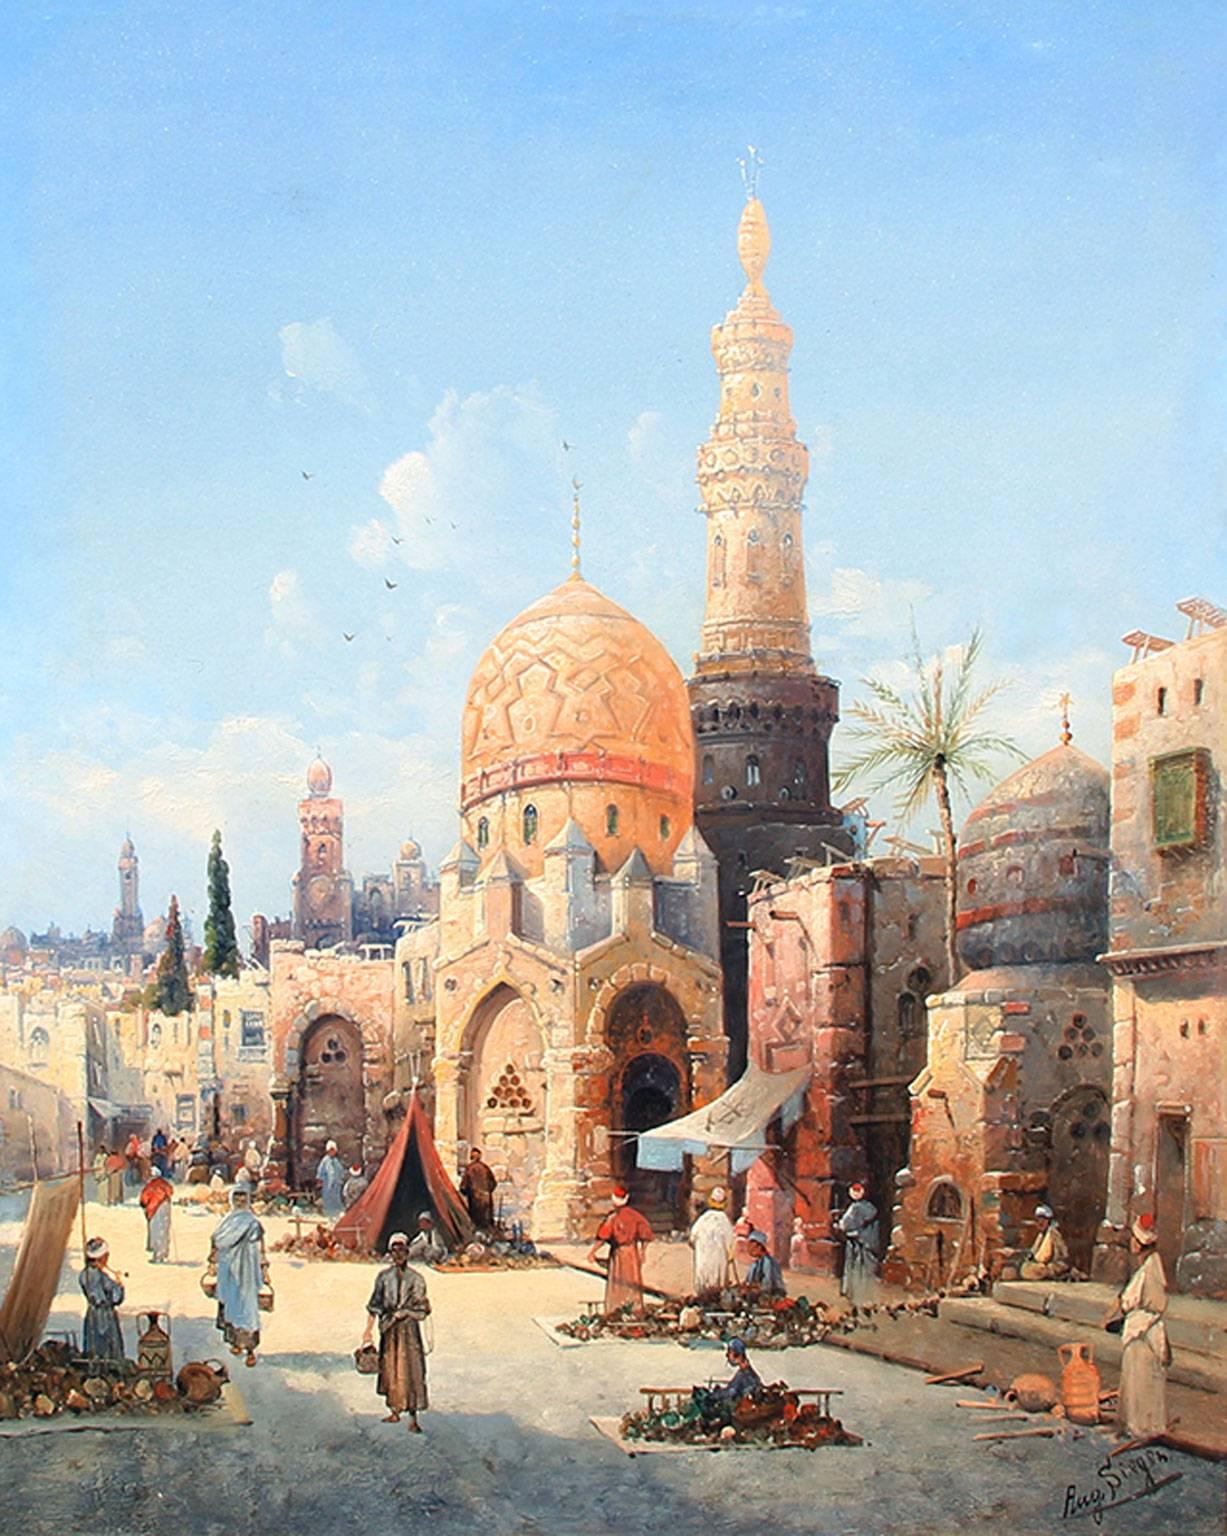 AUGUST VON SIEGEN
German, born 1850

A Street Market in Cairo

Signed Aug. Siegen
Oil on panel
20¾ x 16½ inches (52.5 x 42 cm)
Framed: 30 x 26 inches (76.2 x 66 cm)

Provenance
Private Collection, California